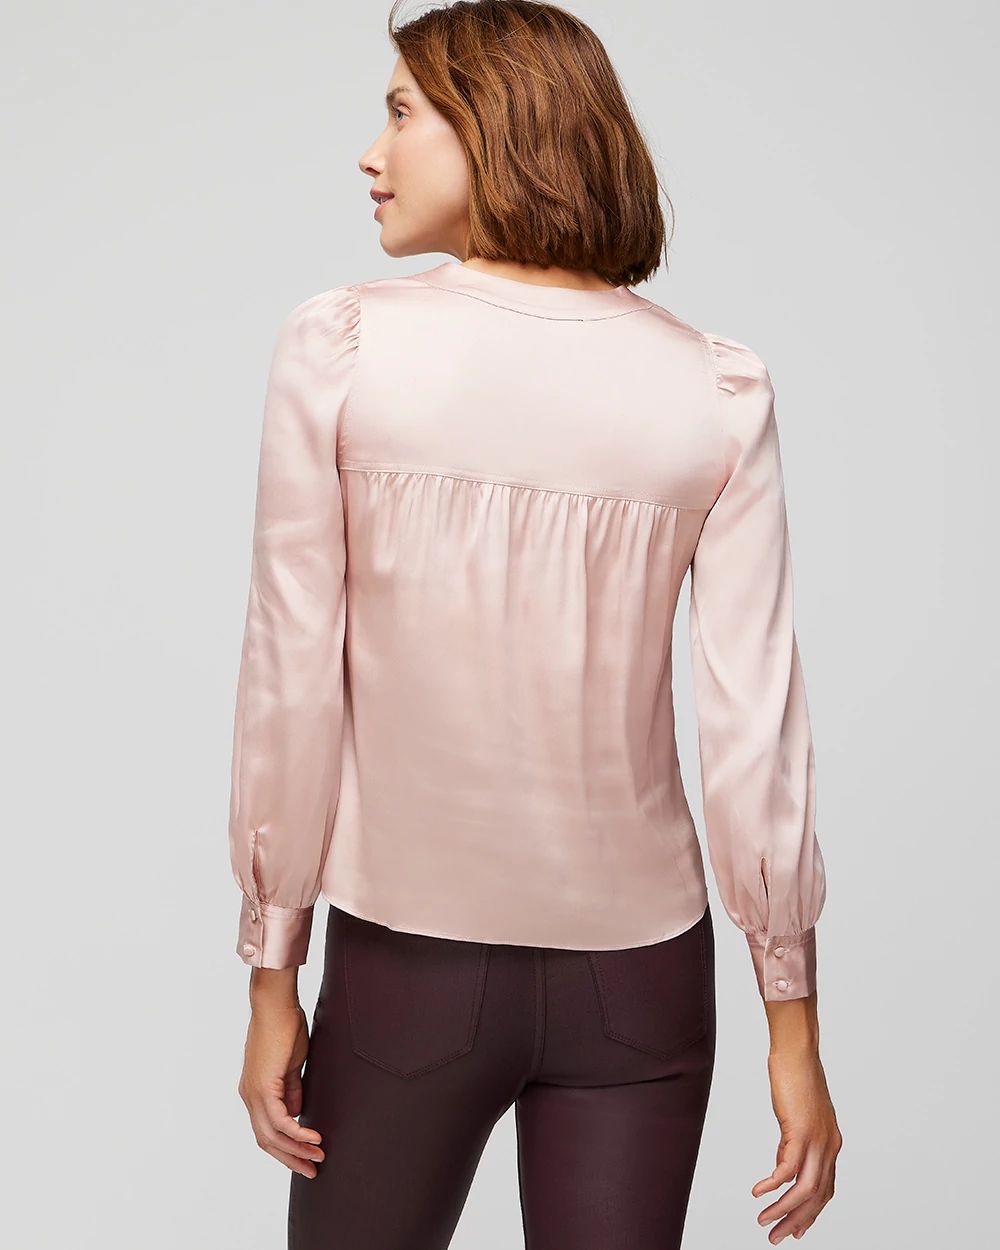 Long Sleeve Topstitch Satin Blouse click to view larger image.